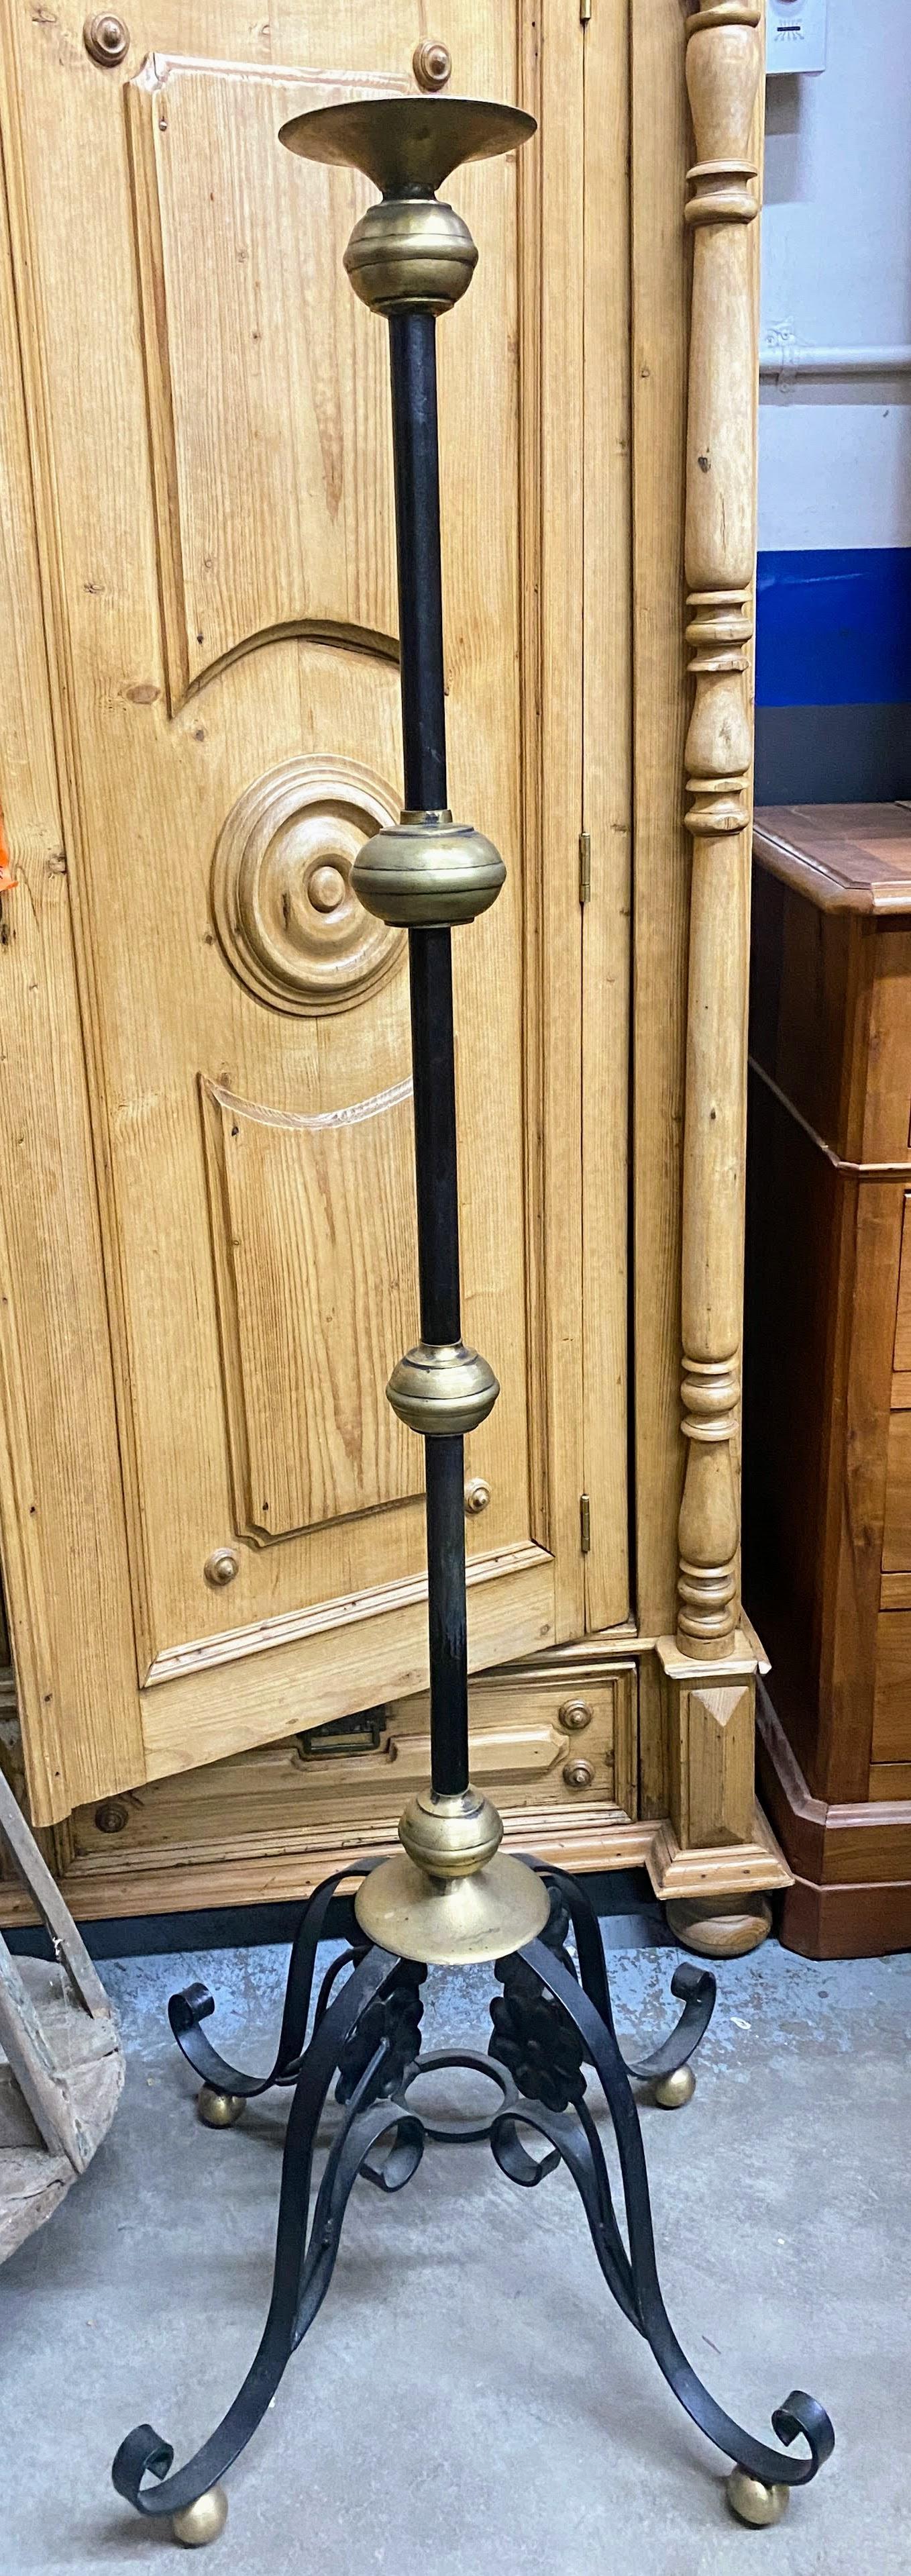 Renaissance Revival Tall Brass and Wrought Iron Church Torchères Candle Floor Stands, a Pair For Sale